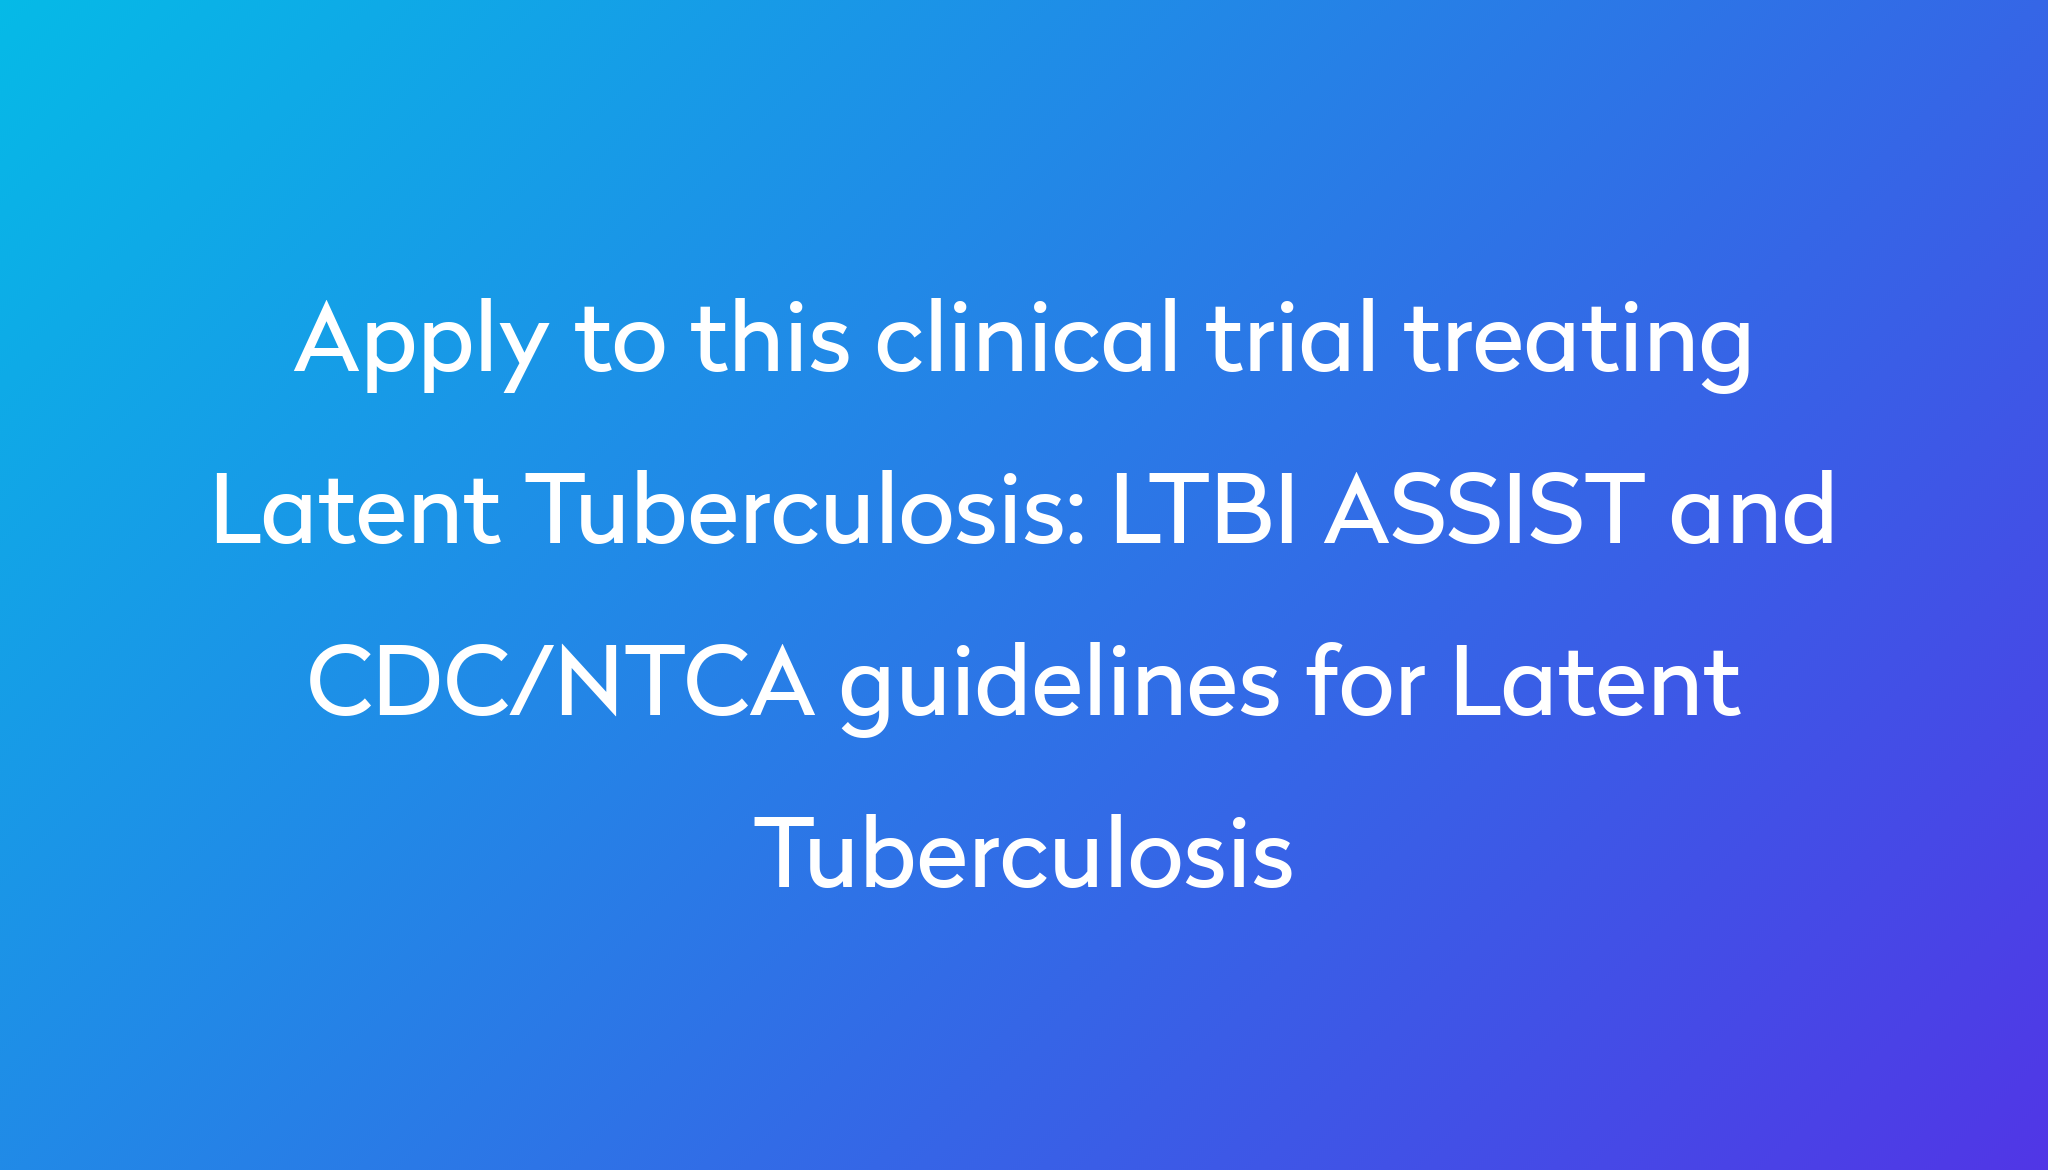 LTBI ASSIST and CDC/NTCA guidelines for Latent Tuberculosis Clinical